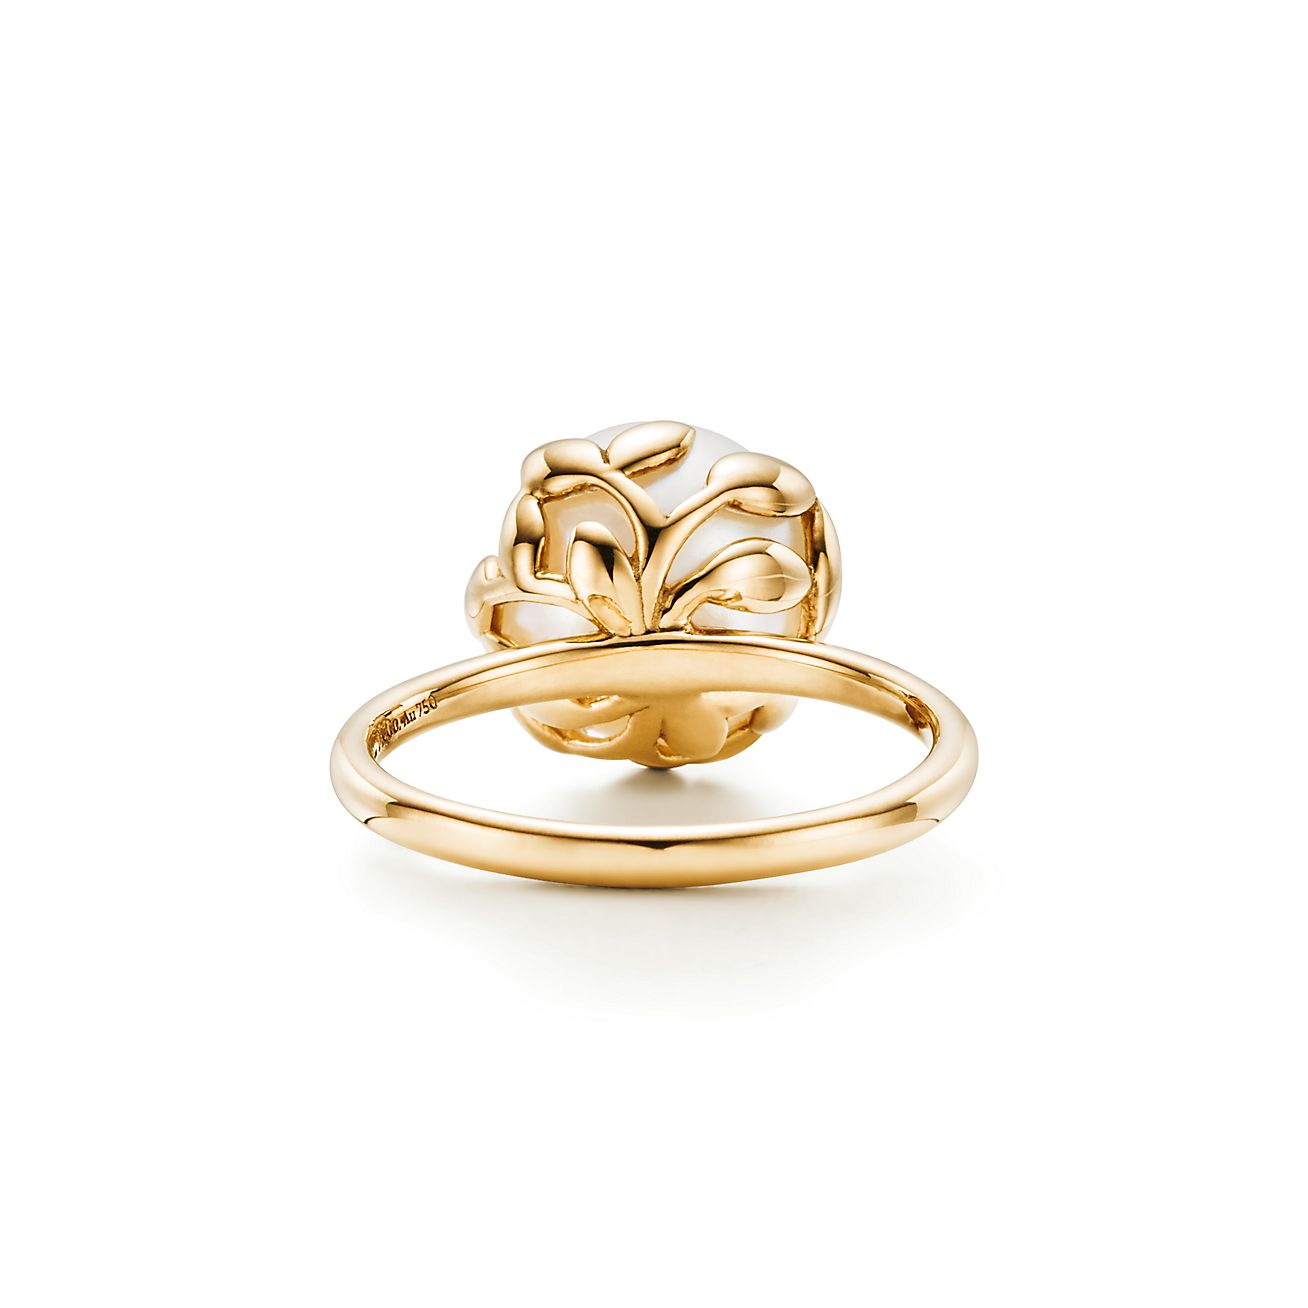 Paloma Picasso® Olive Leaf ring in 18k gold with a freshwater